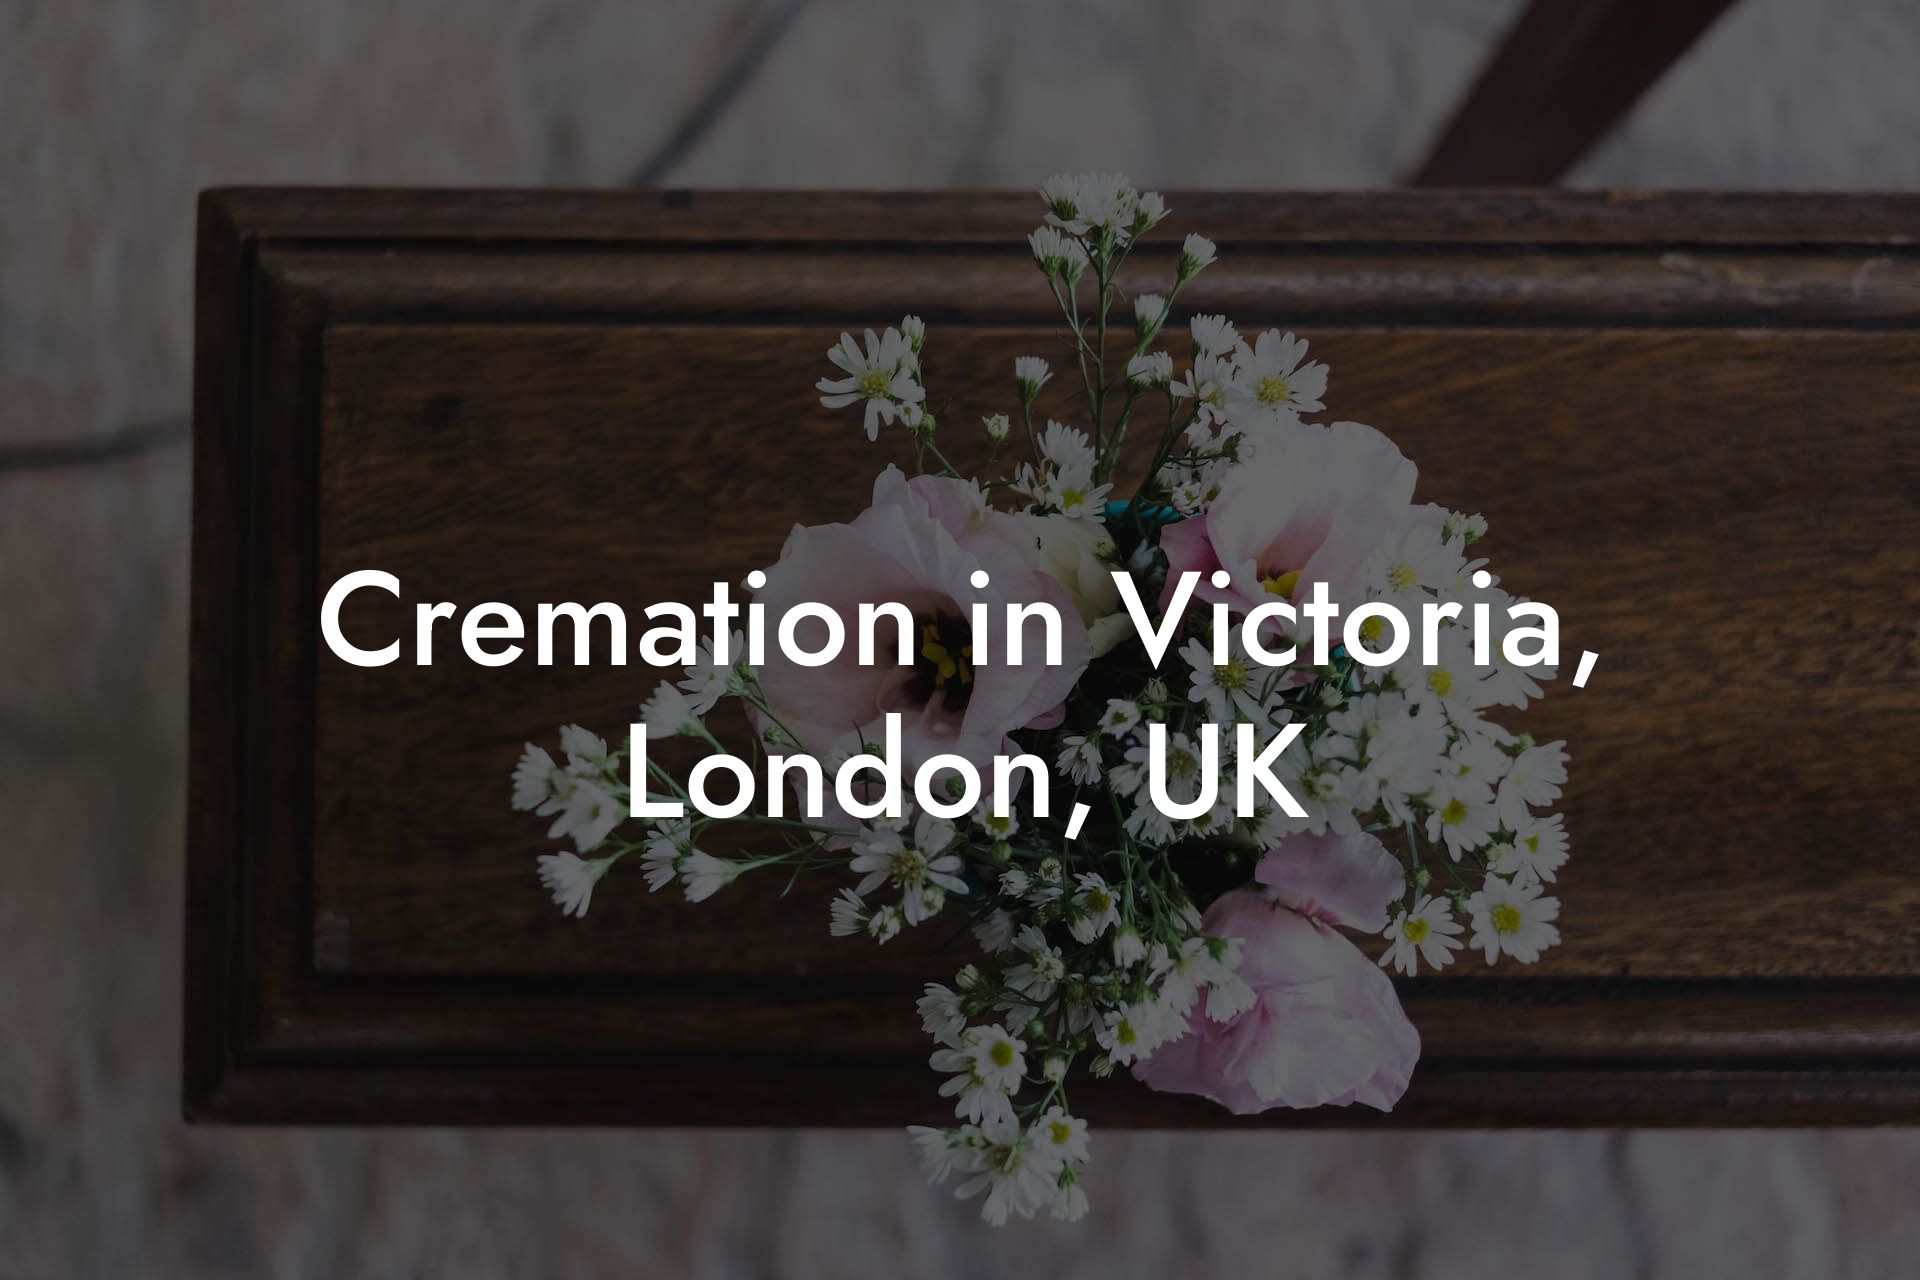 Cremation in Victoria, London, UK